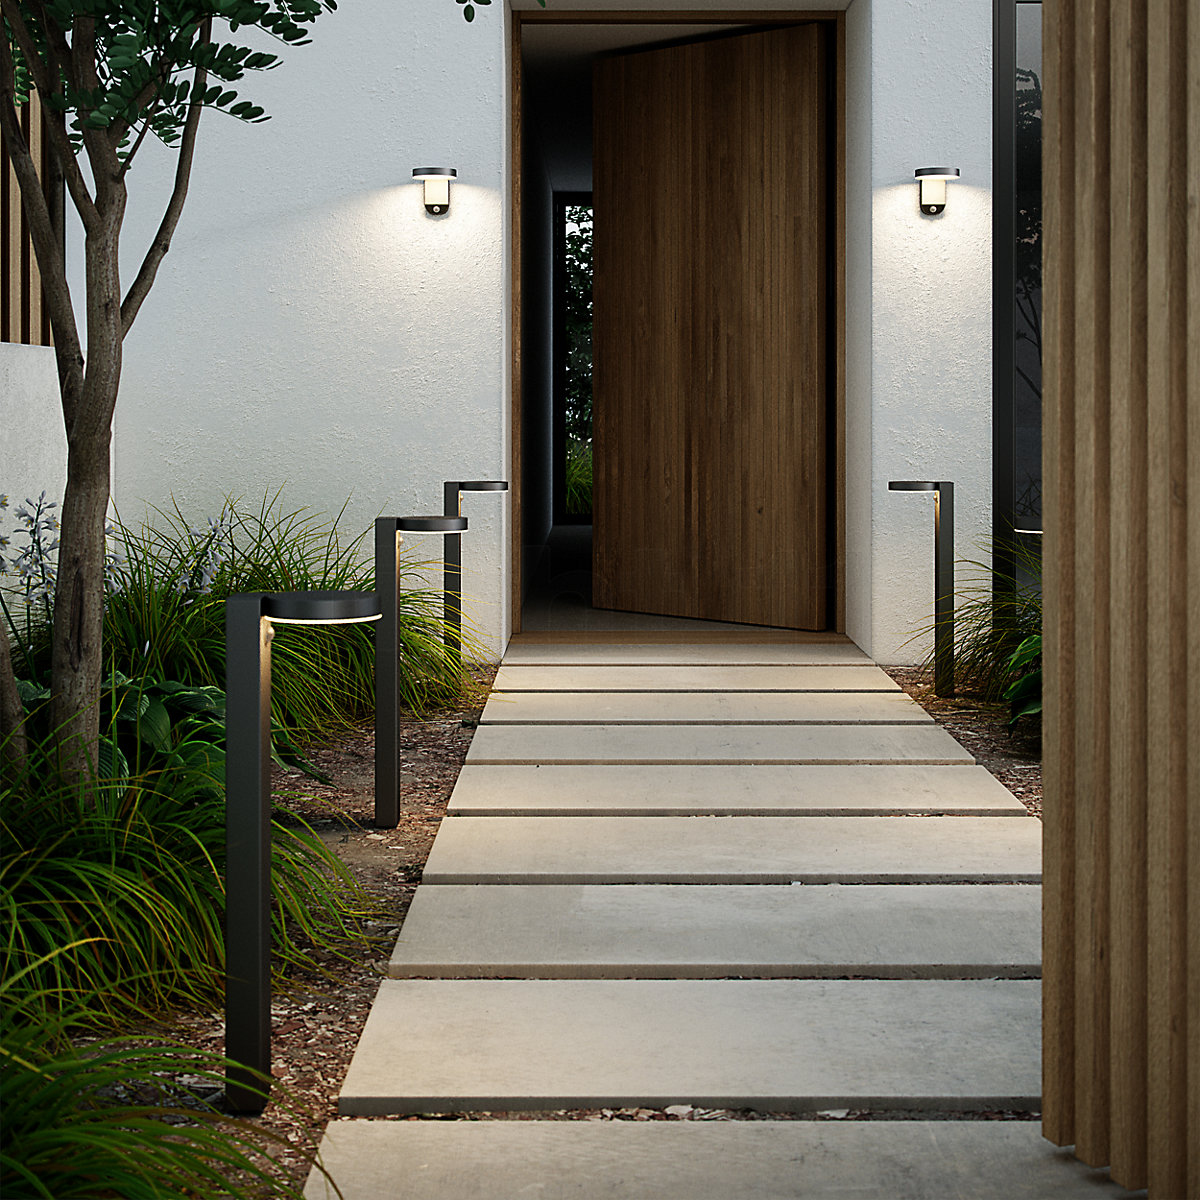 Buy Nordlux Rica Bollard at Light with solar LED